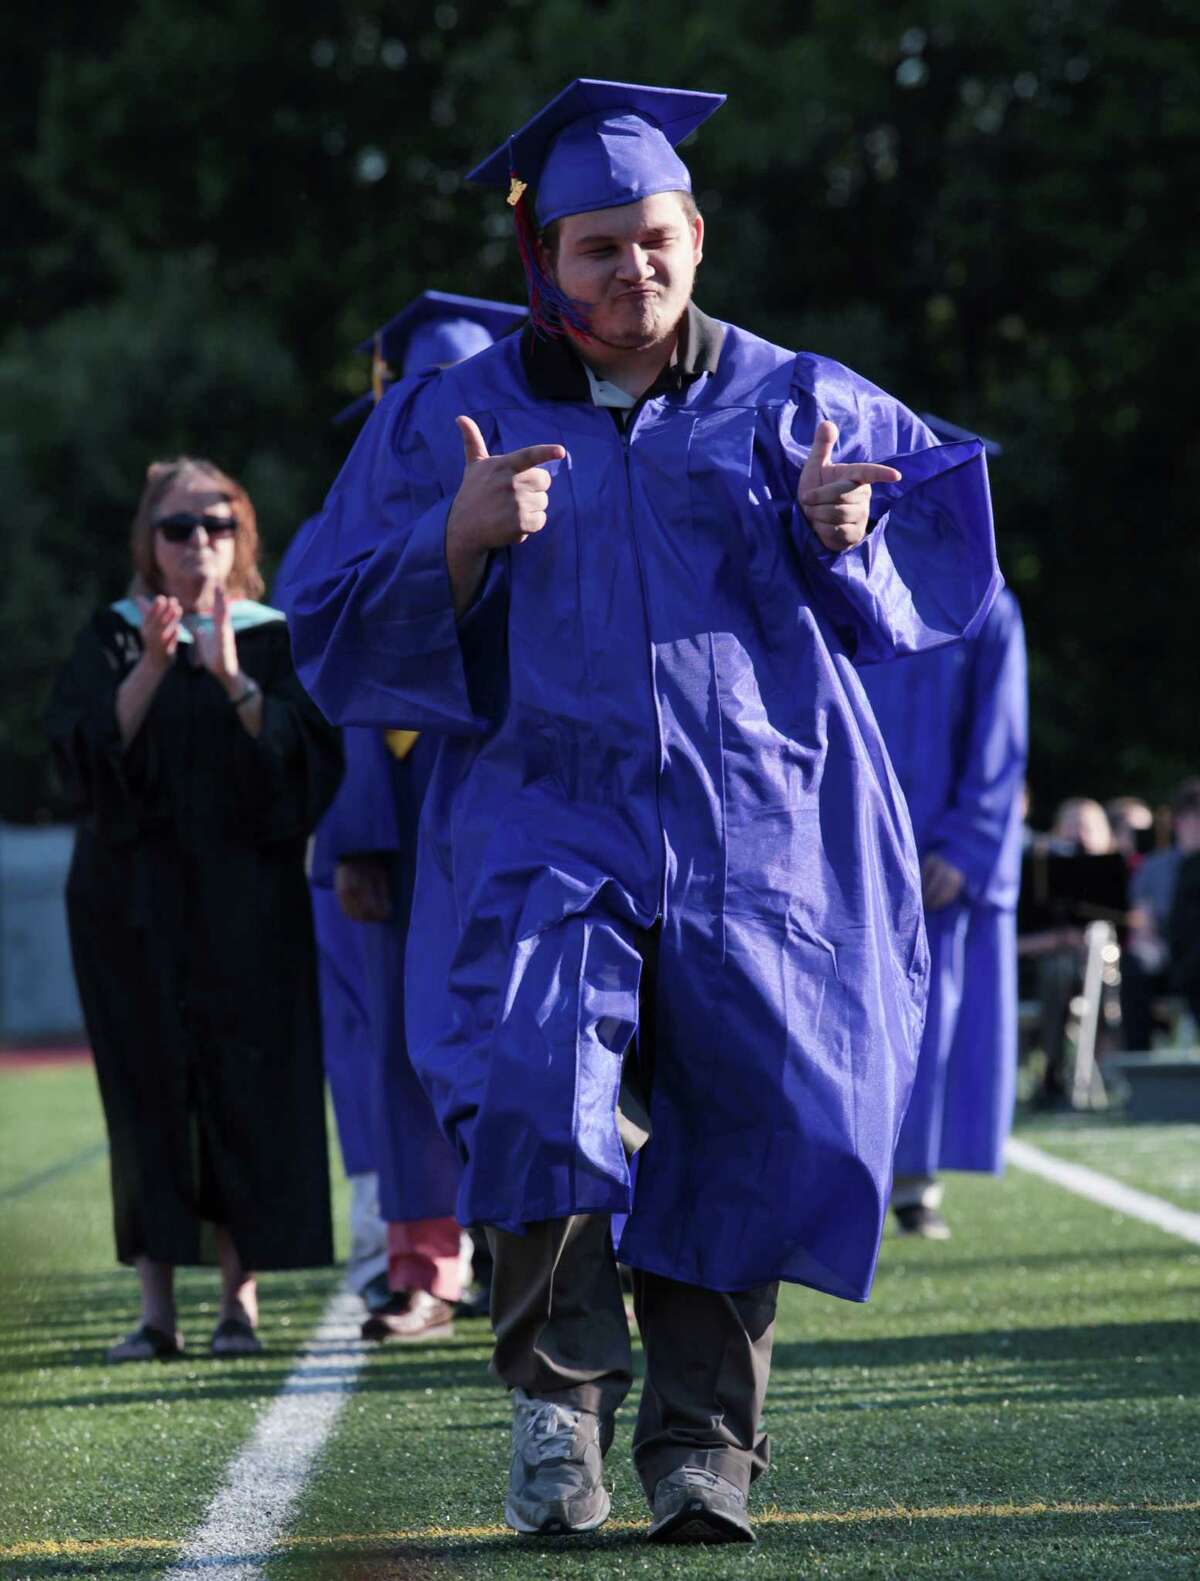 Hunter Quaid Stanford reacts before receiving his diploma at the Joseph A. Foran High School graduation ceremony in Milford, Conn. on Thursday, June 9, 2016.